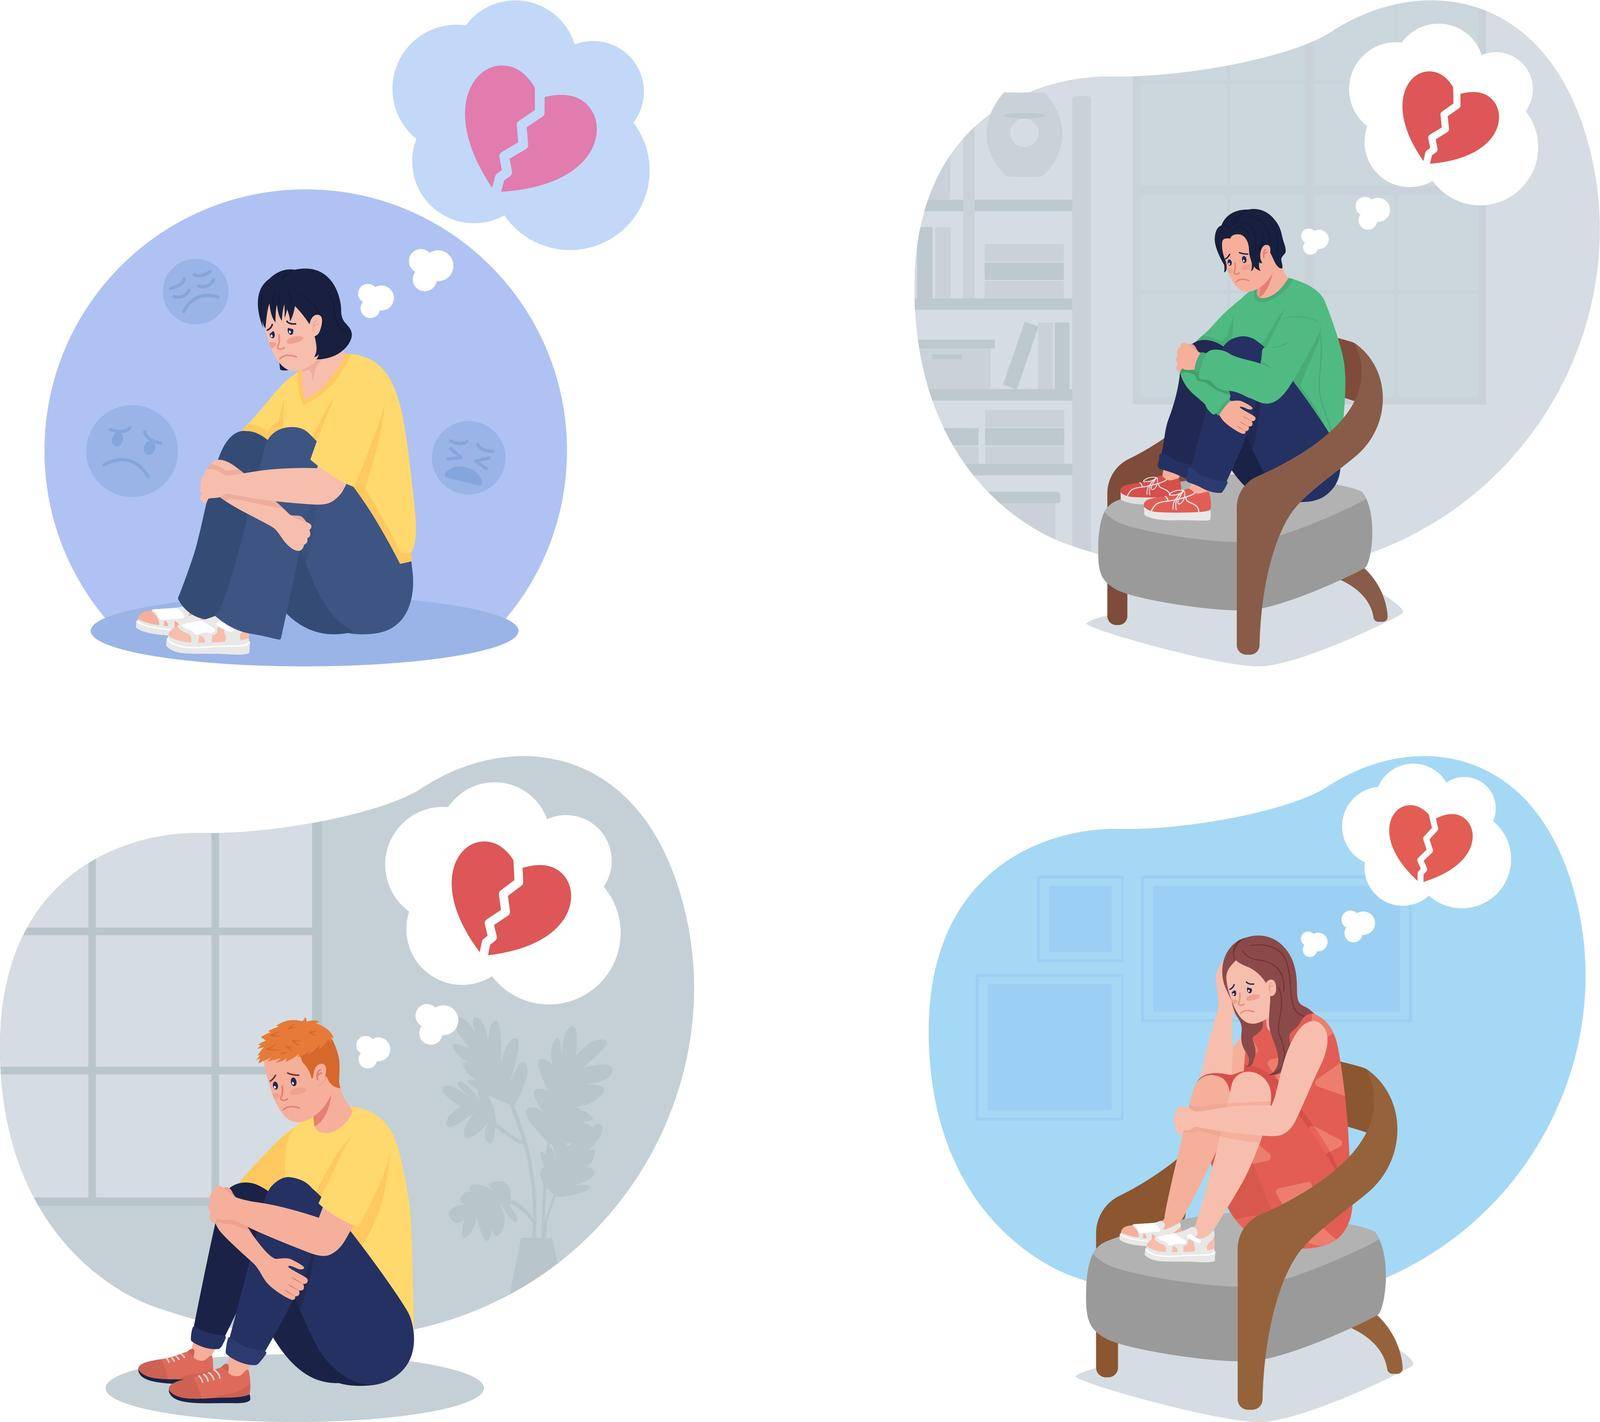 Lonely teen upset over breakup 2D vector isolated illustration set. Boy and girl depressed over heartbreak flat characters on cartoon background. Teenager problem colourful scene collection